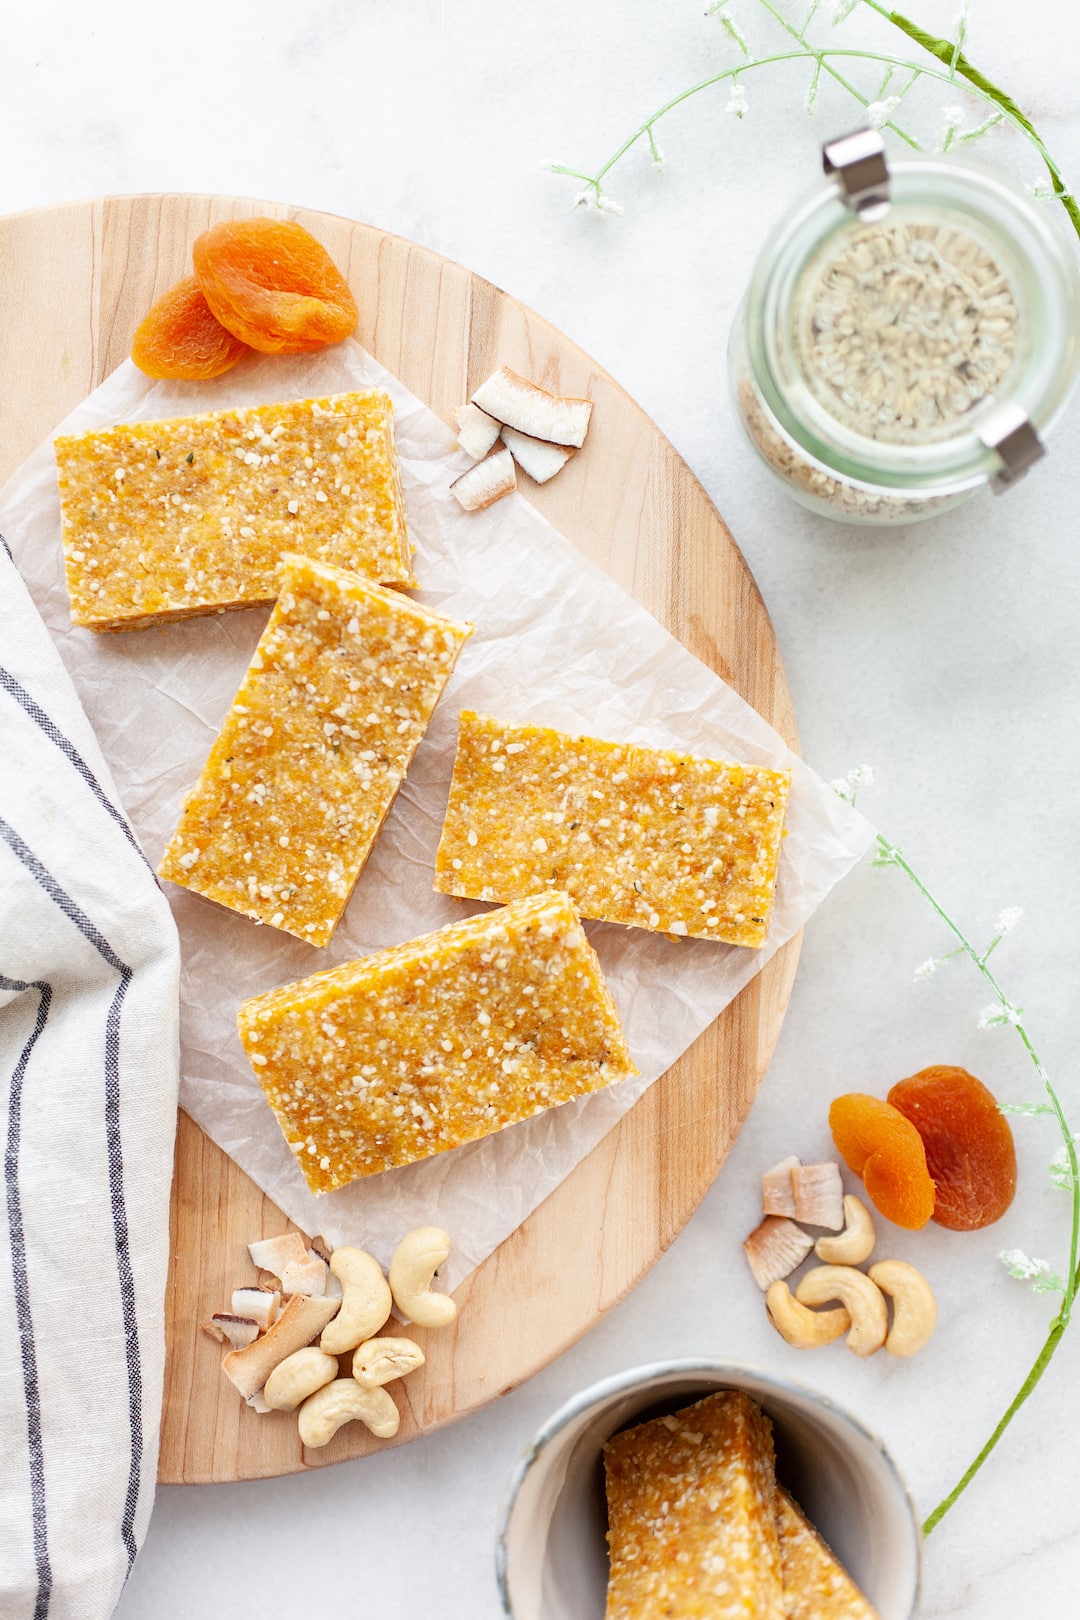 Apricot Cashew Energy Bars on a wood board